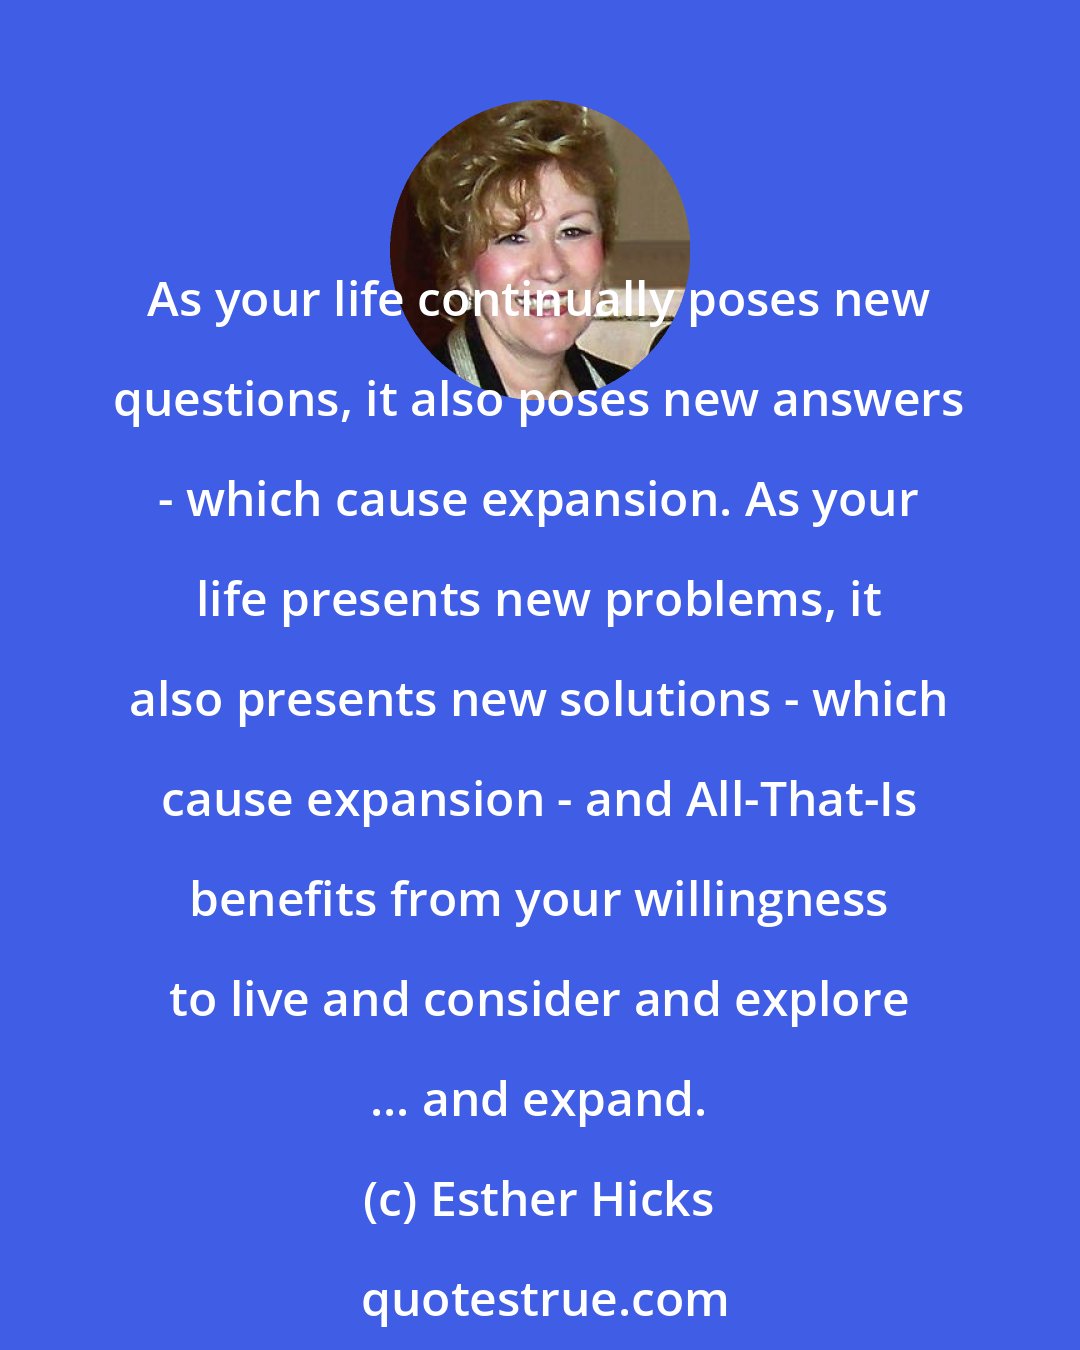 Esther Hicks: As your life continually poses new questions, it also poses new answers - which cause expansion. As your life presents new problems, it also presents new solutions - which cause expansion - and All-That-Is benefits from your willingness to live and consider and explore ... and expand.